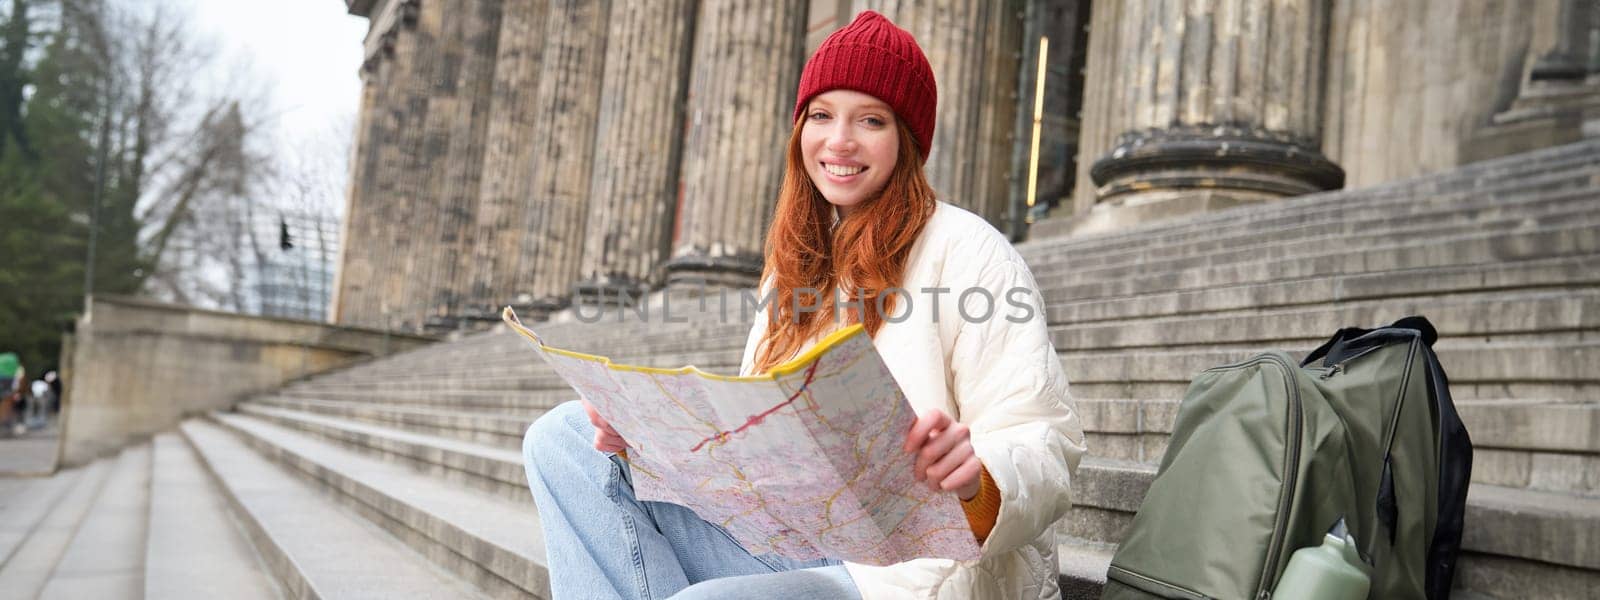 Tourism and lifestyle concept. Young redhead woman looking at city map, plans a route for sightseeing day, sits outdoors on stairs and rests by Benzoix